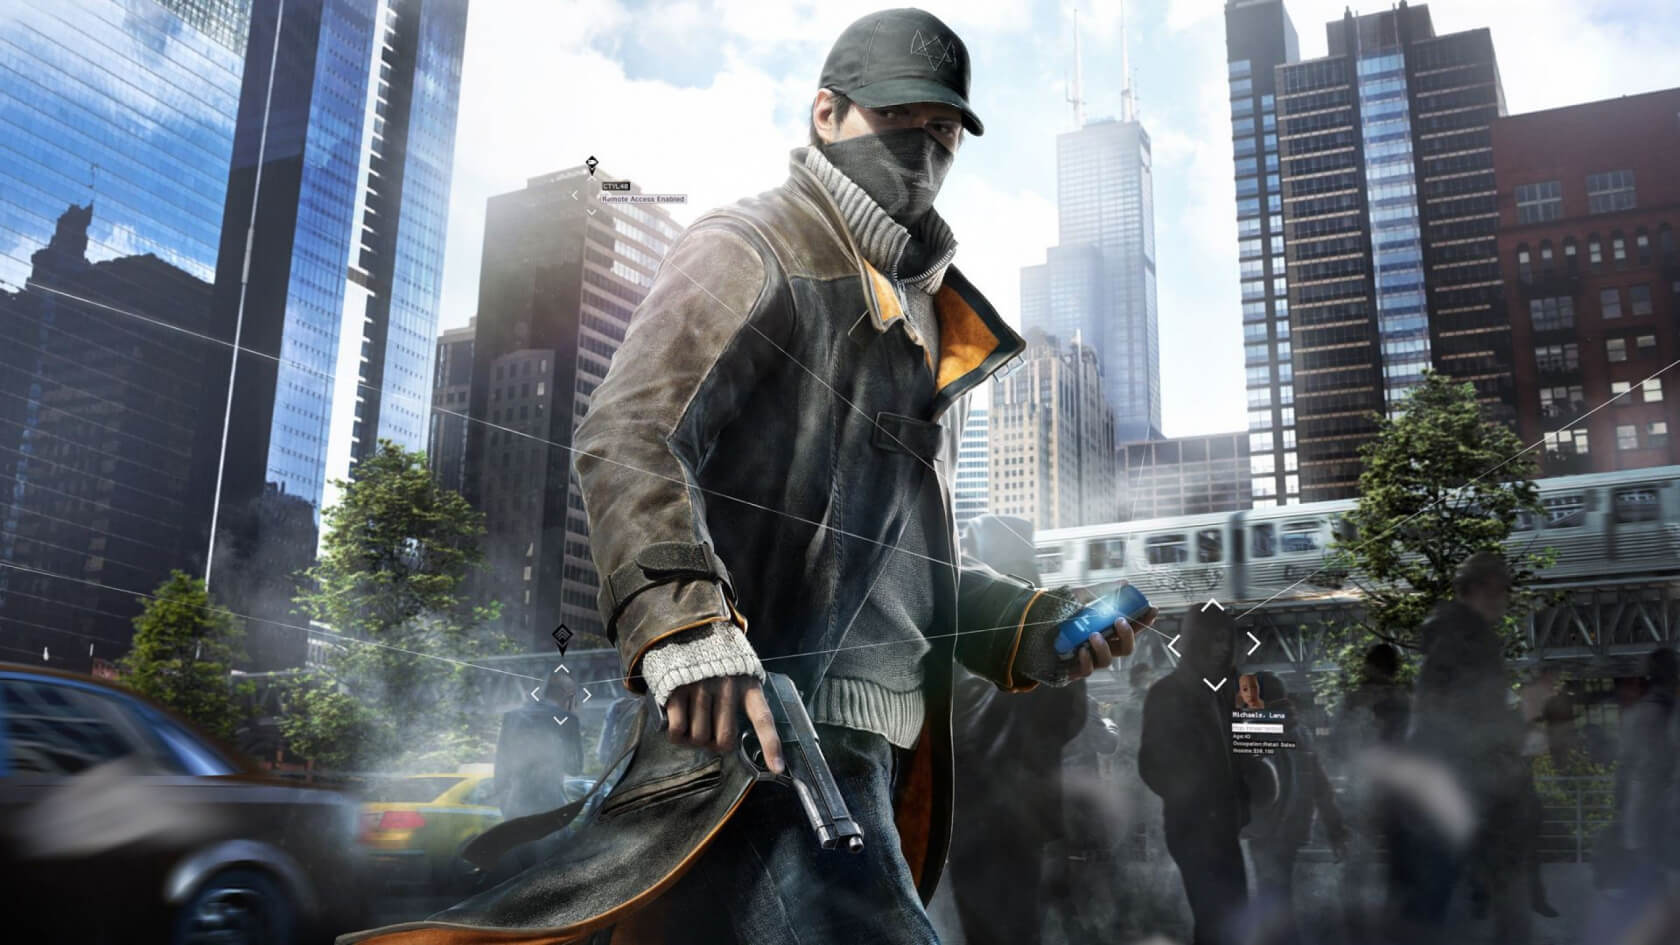 watch dogs 2 download pc windows 10